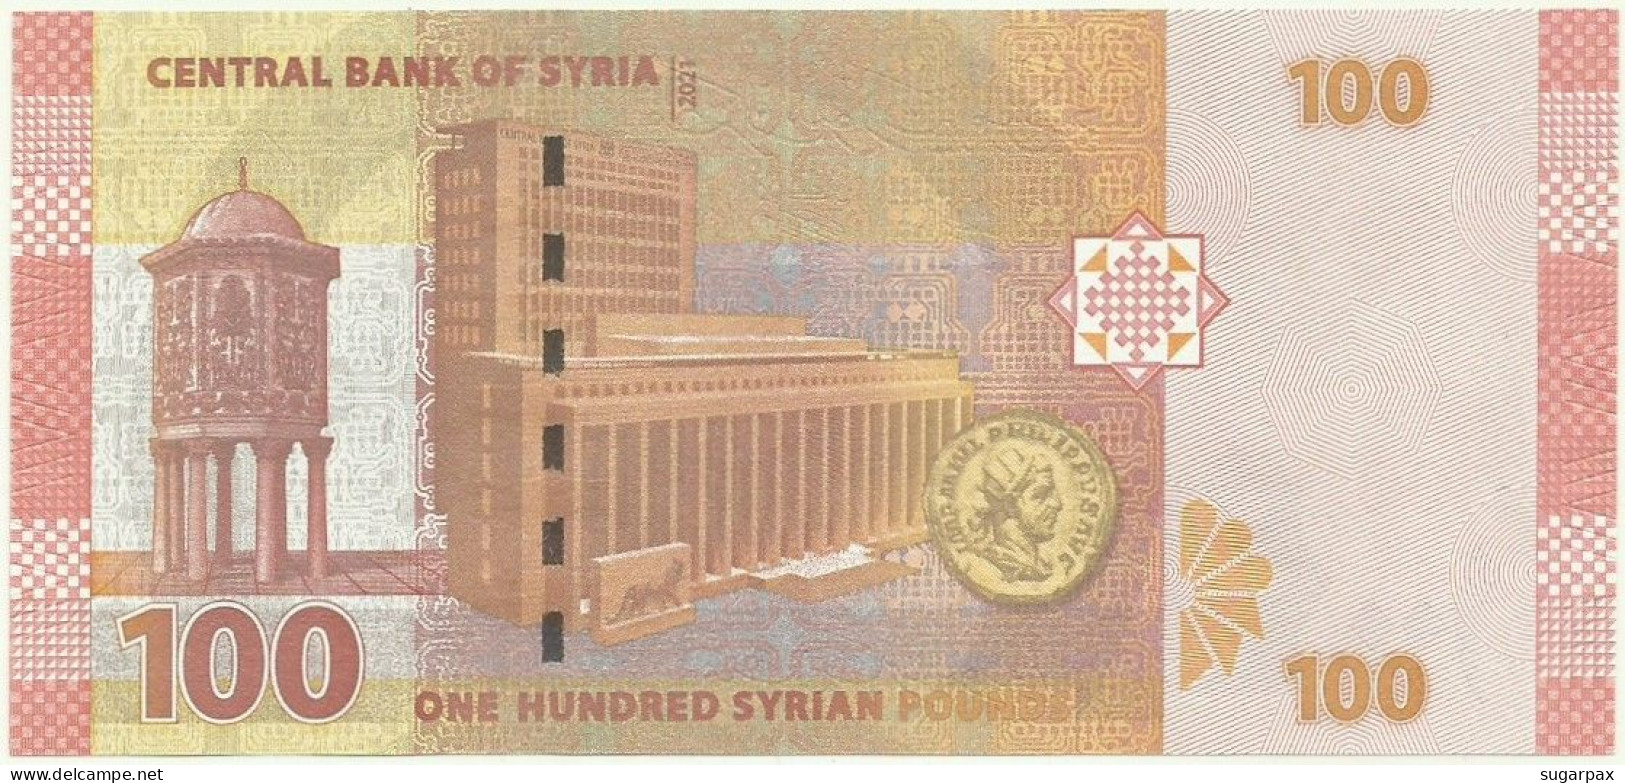 Syria - 100 Syrian Pounds - 2021 / AH 1442 - Pick 113.NEW - Unc. - Serie M/13 - Syrië